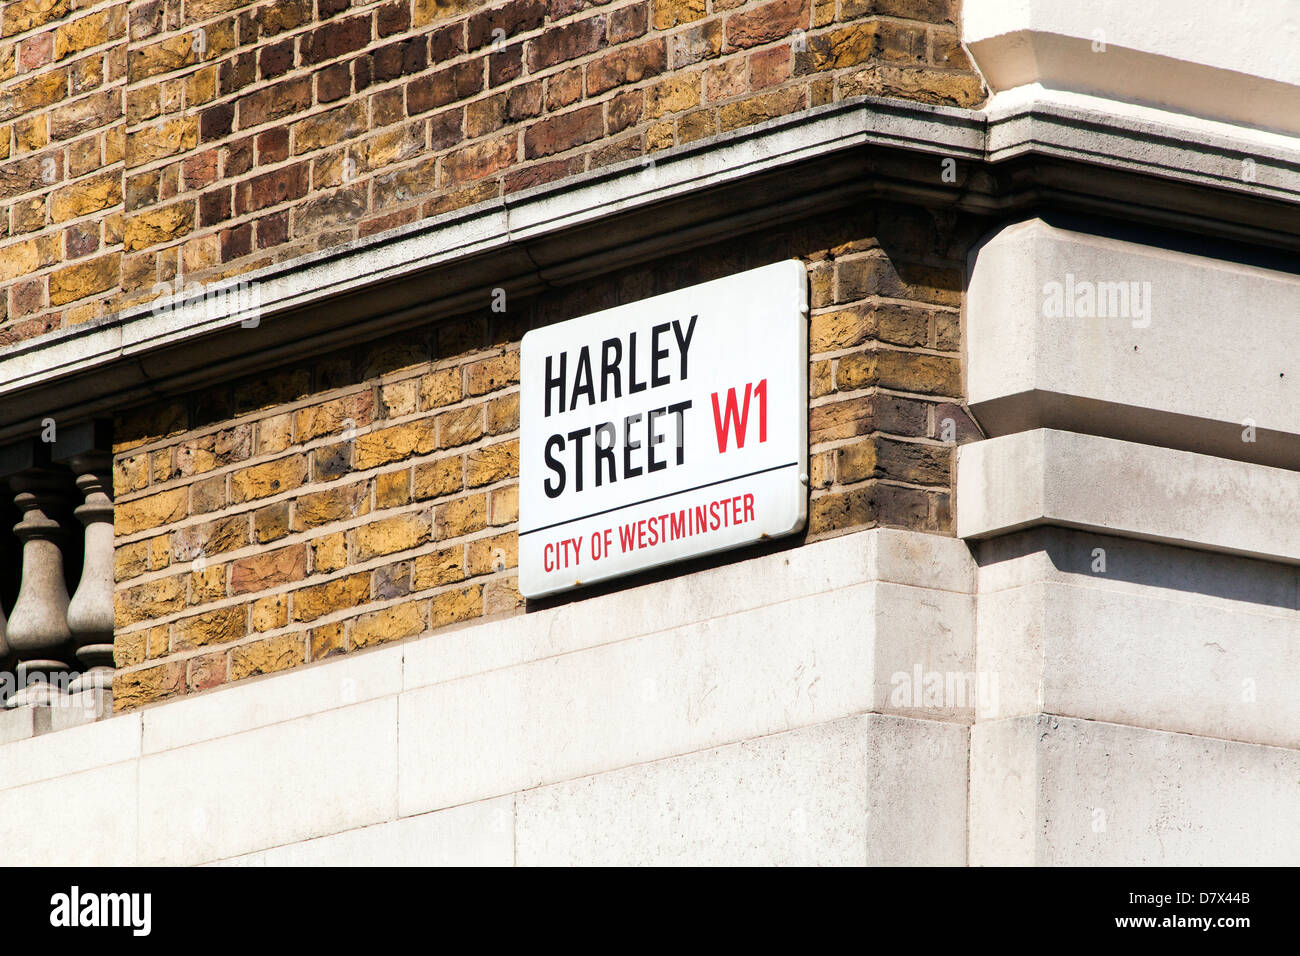 Harley Street London, location of many private medical consultants. Stock Photo